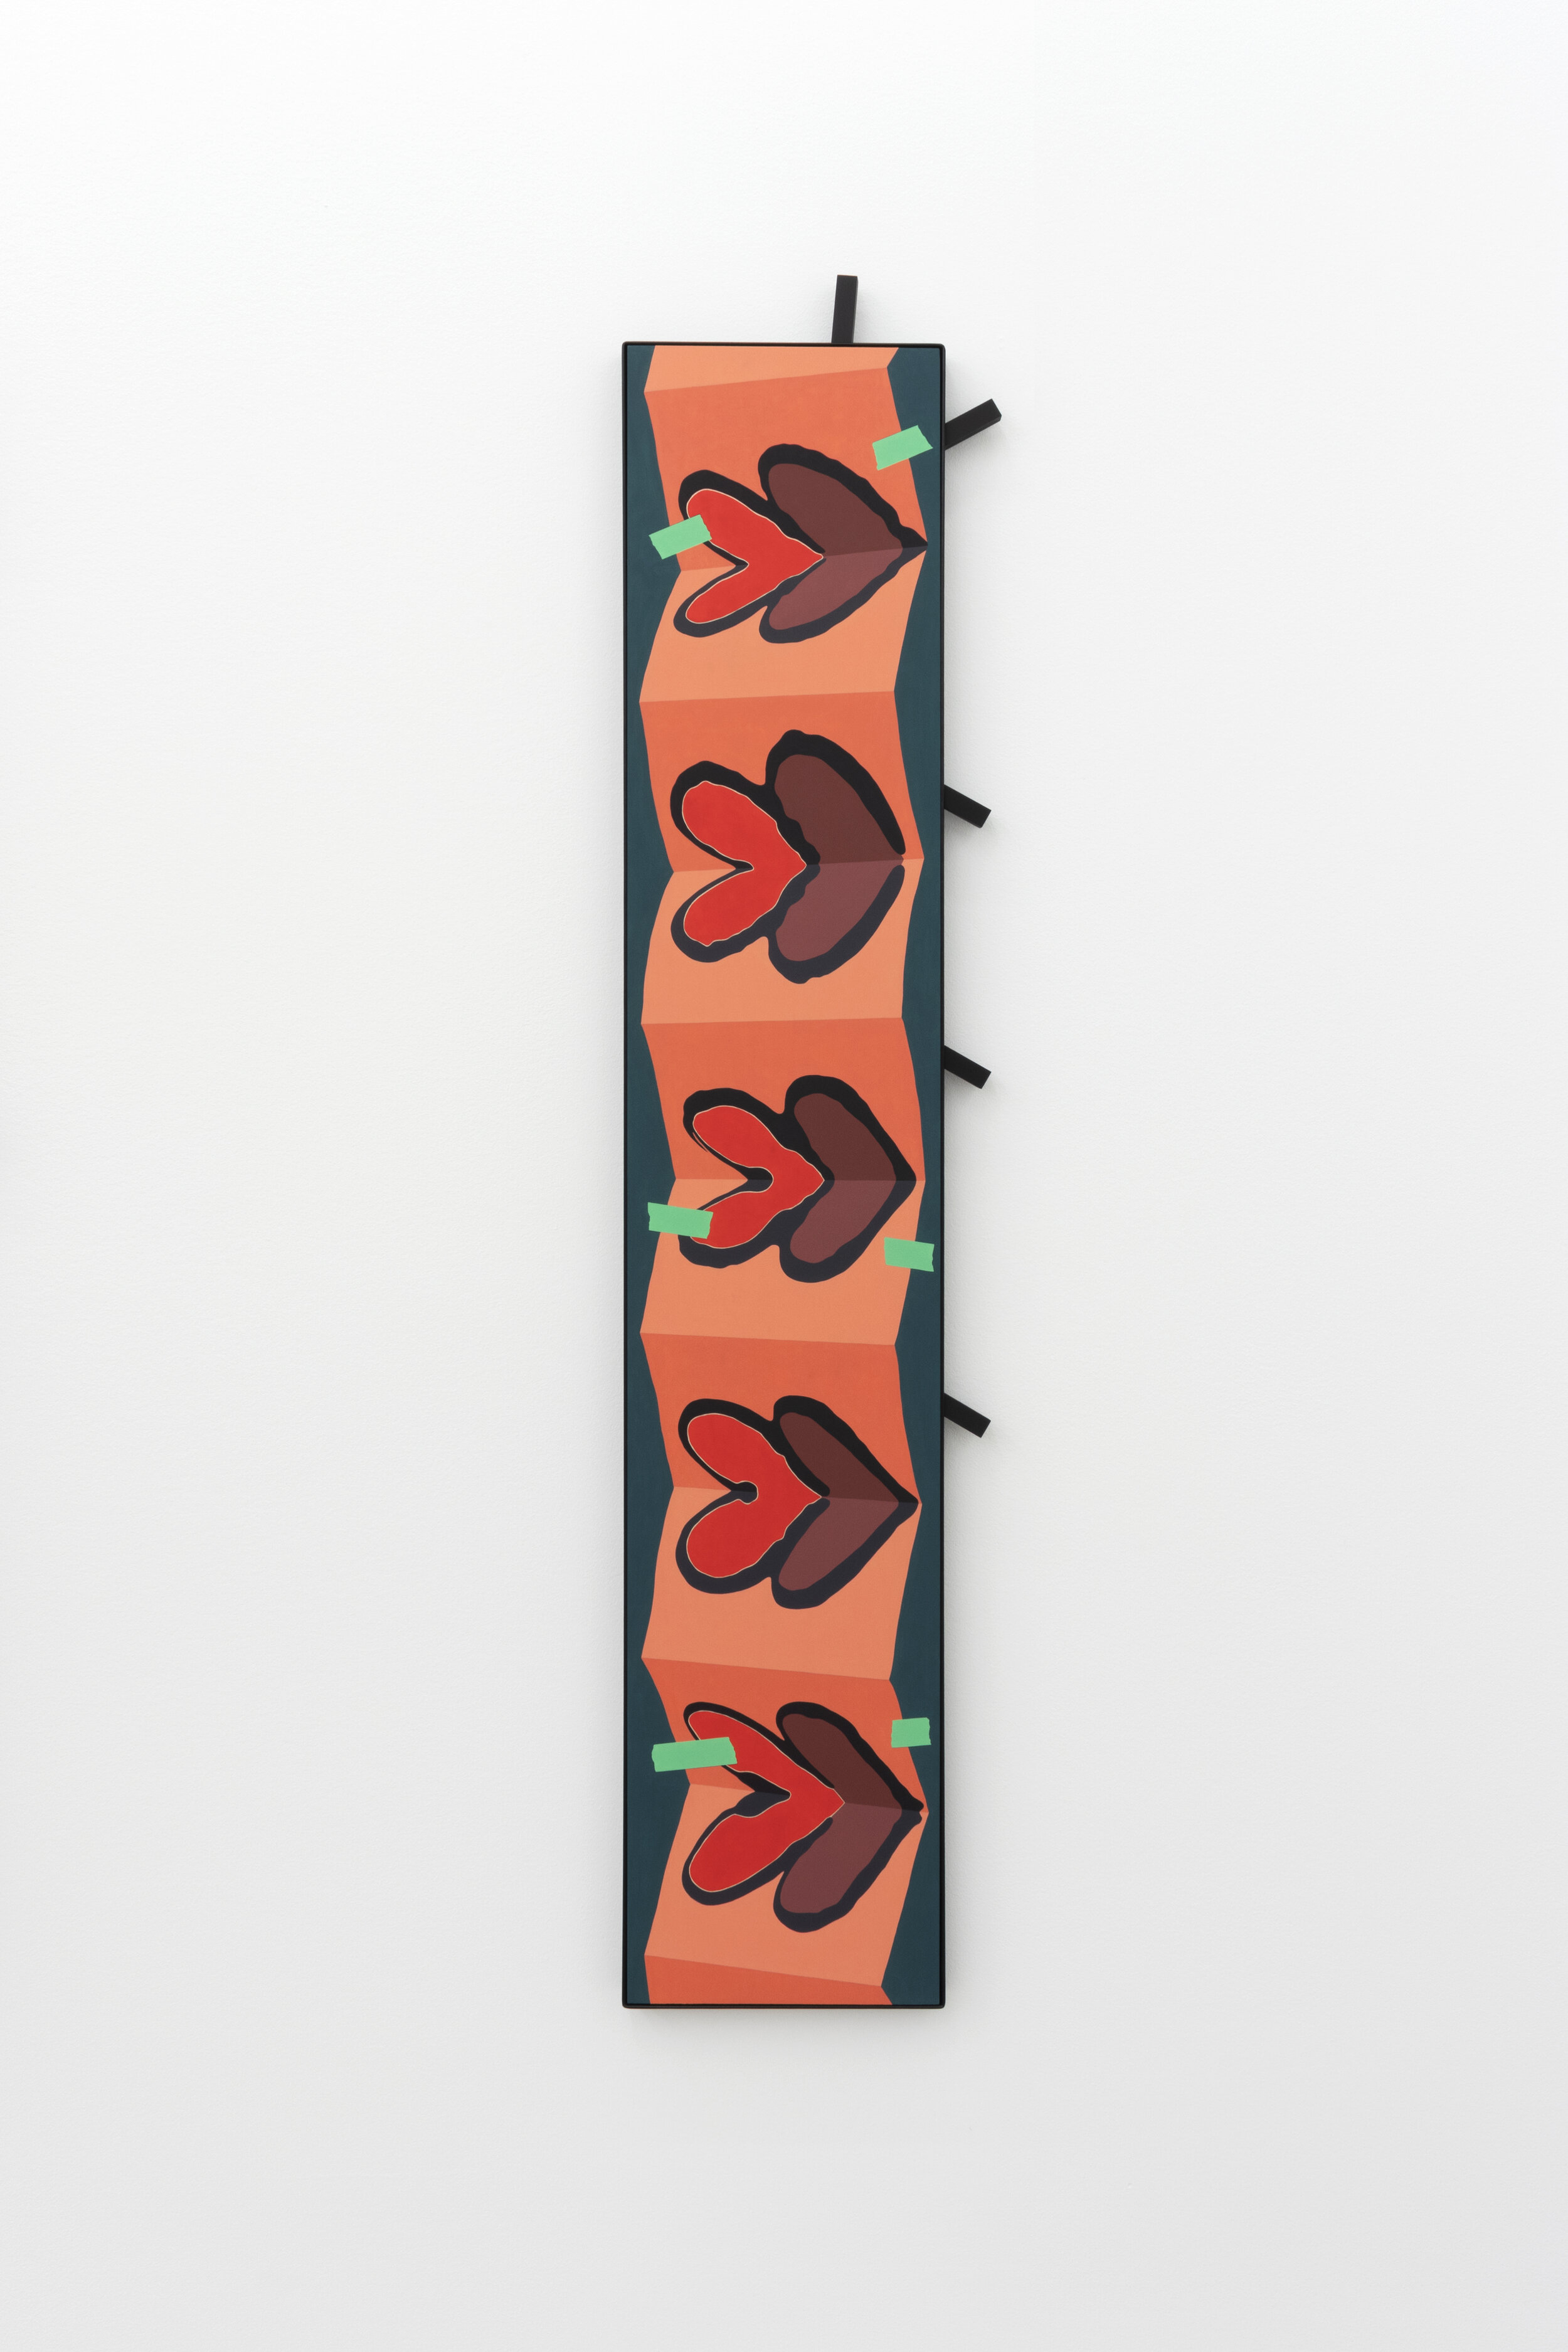  Vanessa Maltese    Hypothesizing coincidence no. 8 , 2020   Oil on panel, powder coated steel, wood, magnets   60.25 x 11.25 in  